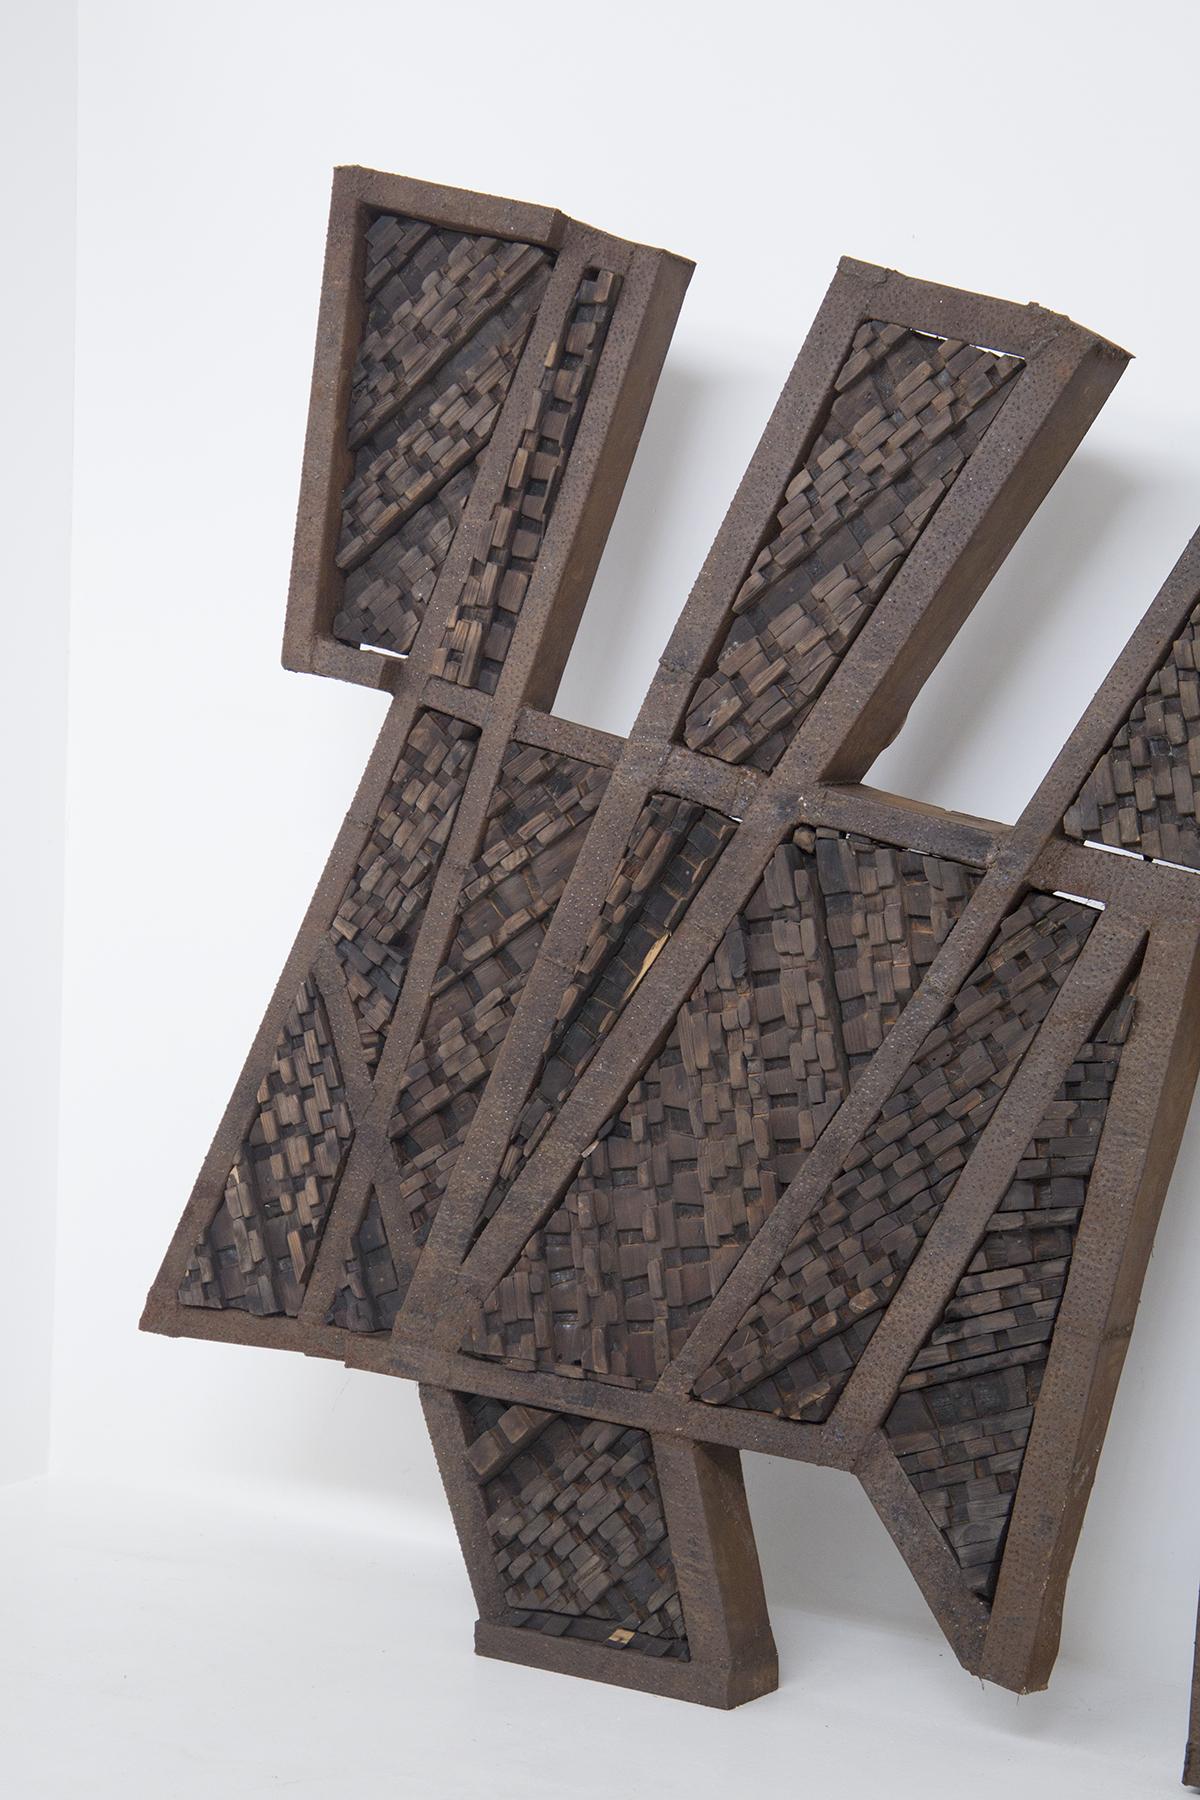 Gorgeous vintage Italian abstract Brutalist sculpture in wrought iron and wood, taken from a private house in Milan, in the 1950s, by unknown artist.
Brutalist sculpture is composed of two pieces that fit together at the center point of the